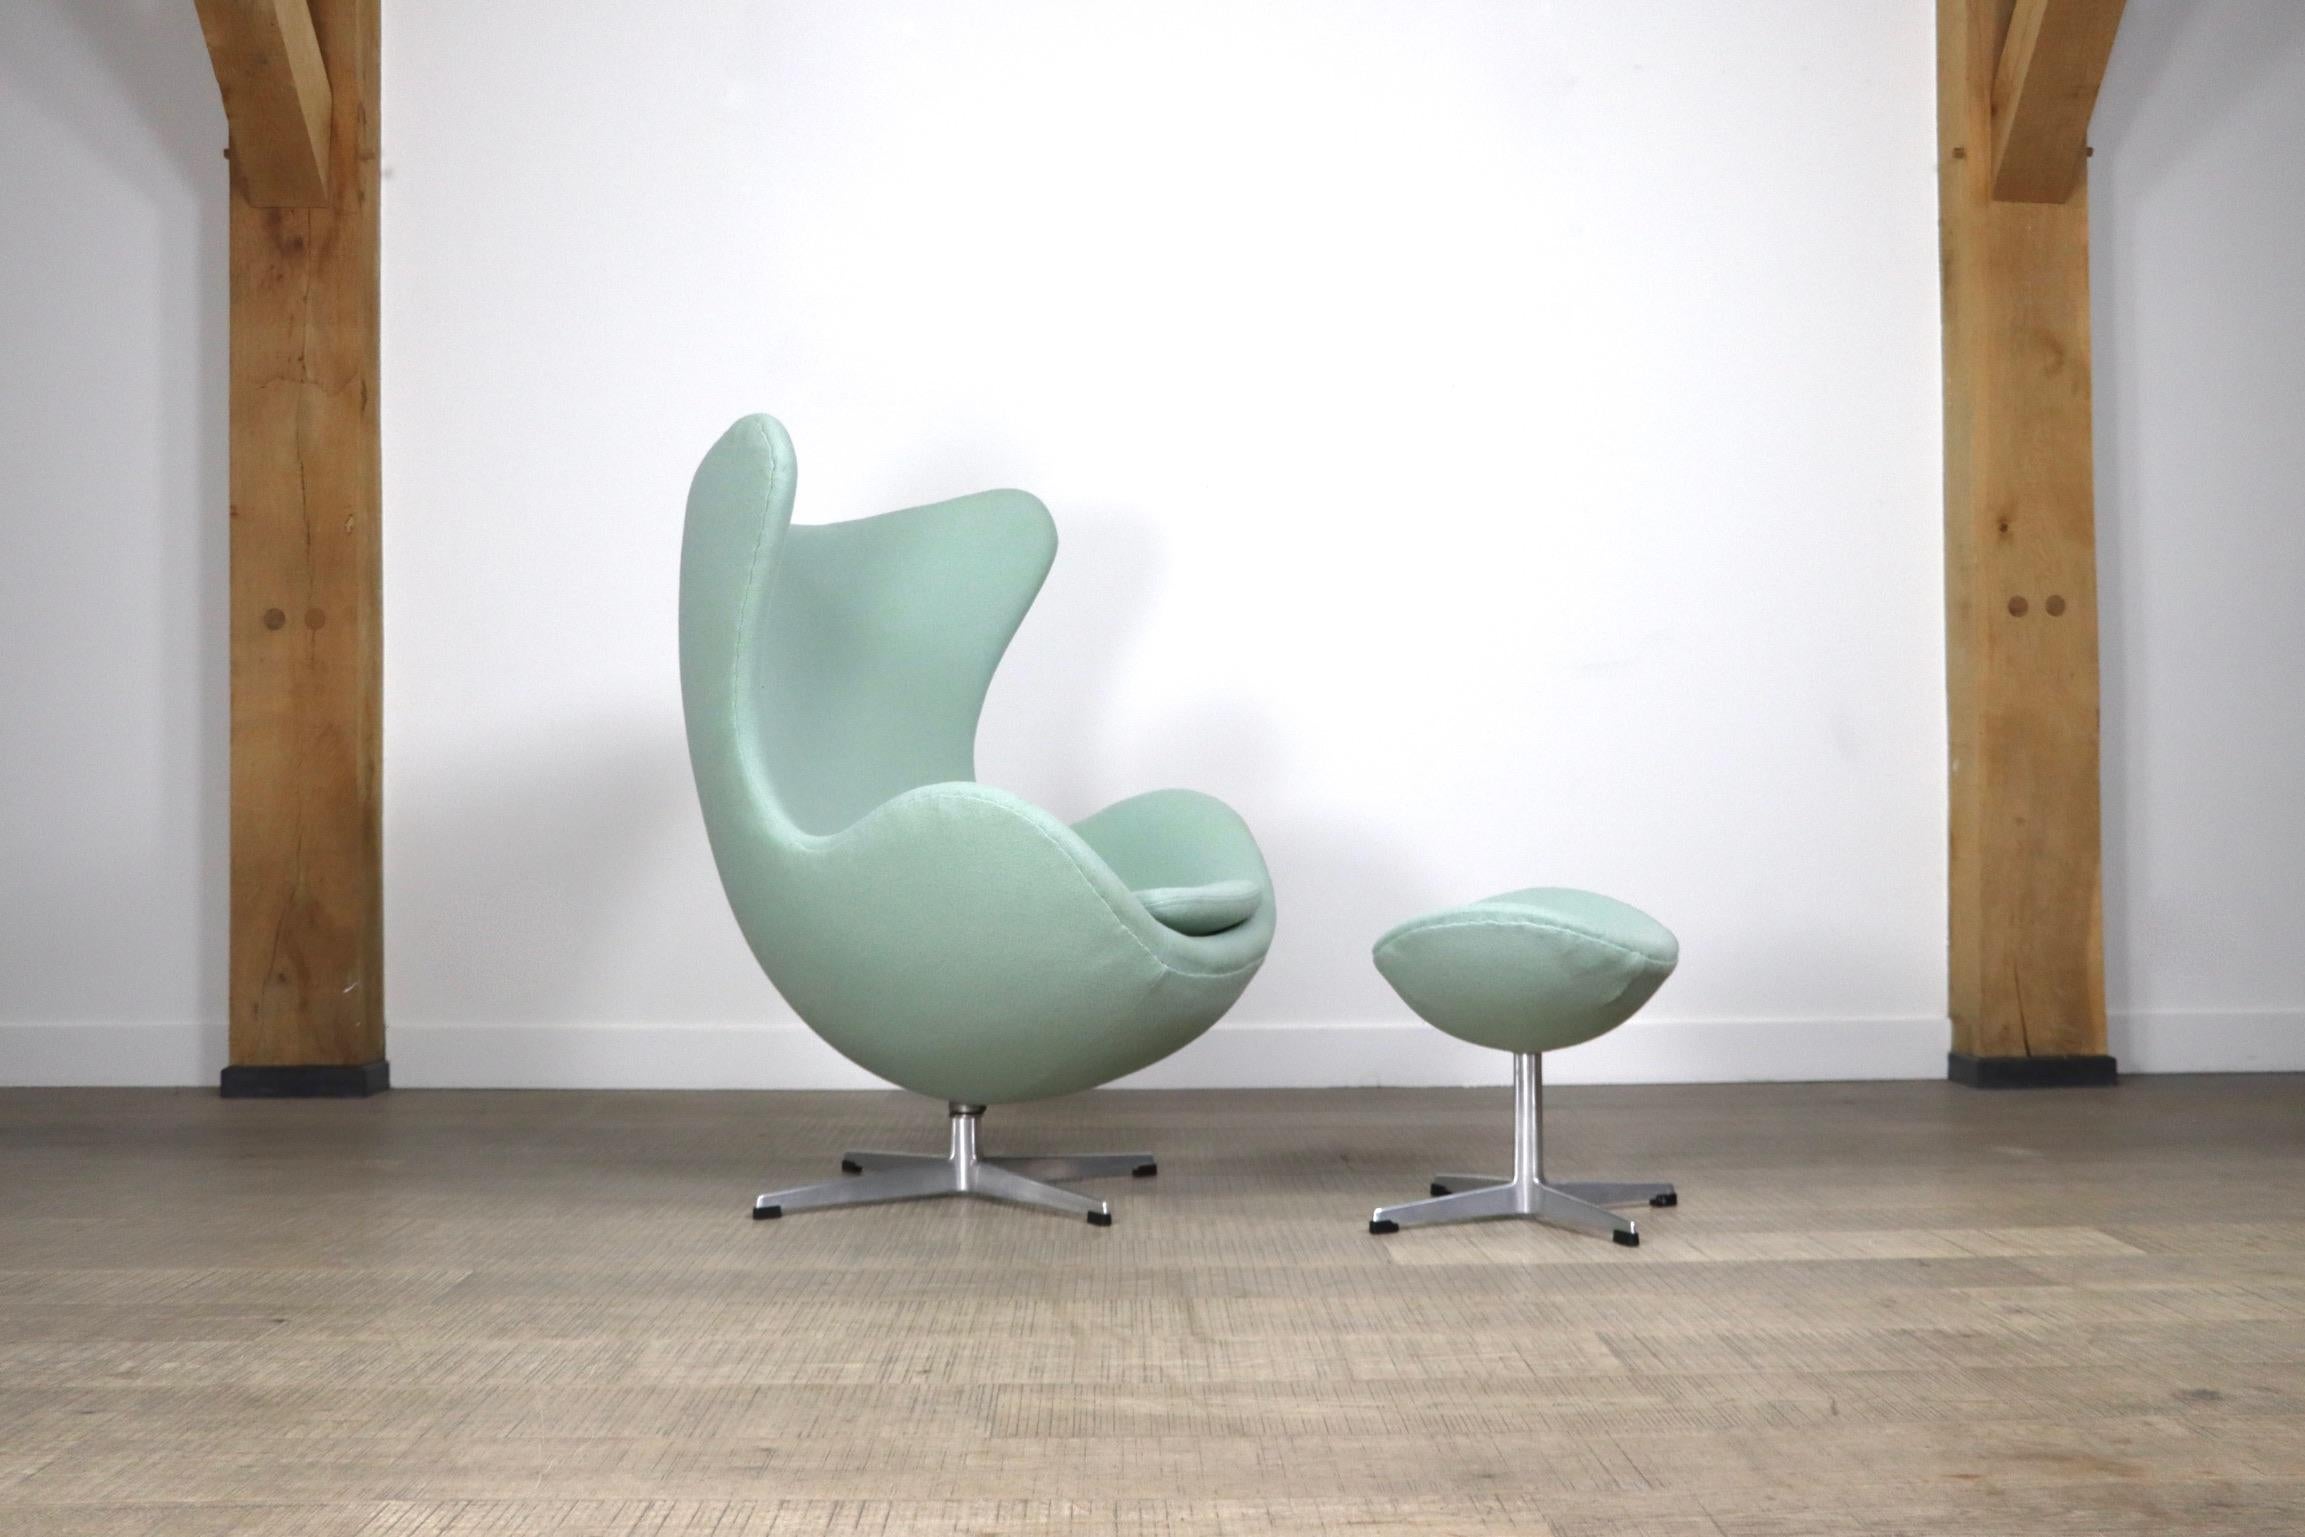 Beautiful early model egg Chair by Arne Jacobsen for Fritz Hansen, 1960s. The number on the original label (0763) shows the chair is produced in the 1963. This incredibly comfortable chair has become an icon for its sophisticated 'egg shell' like